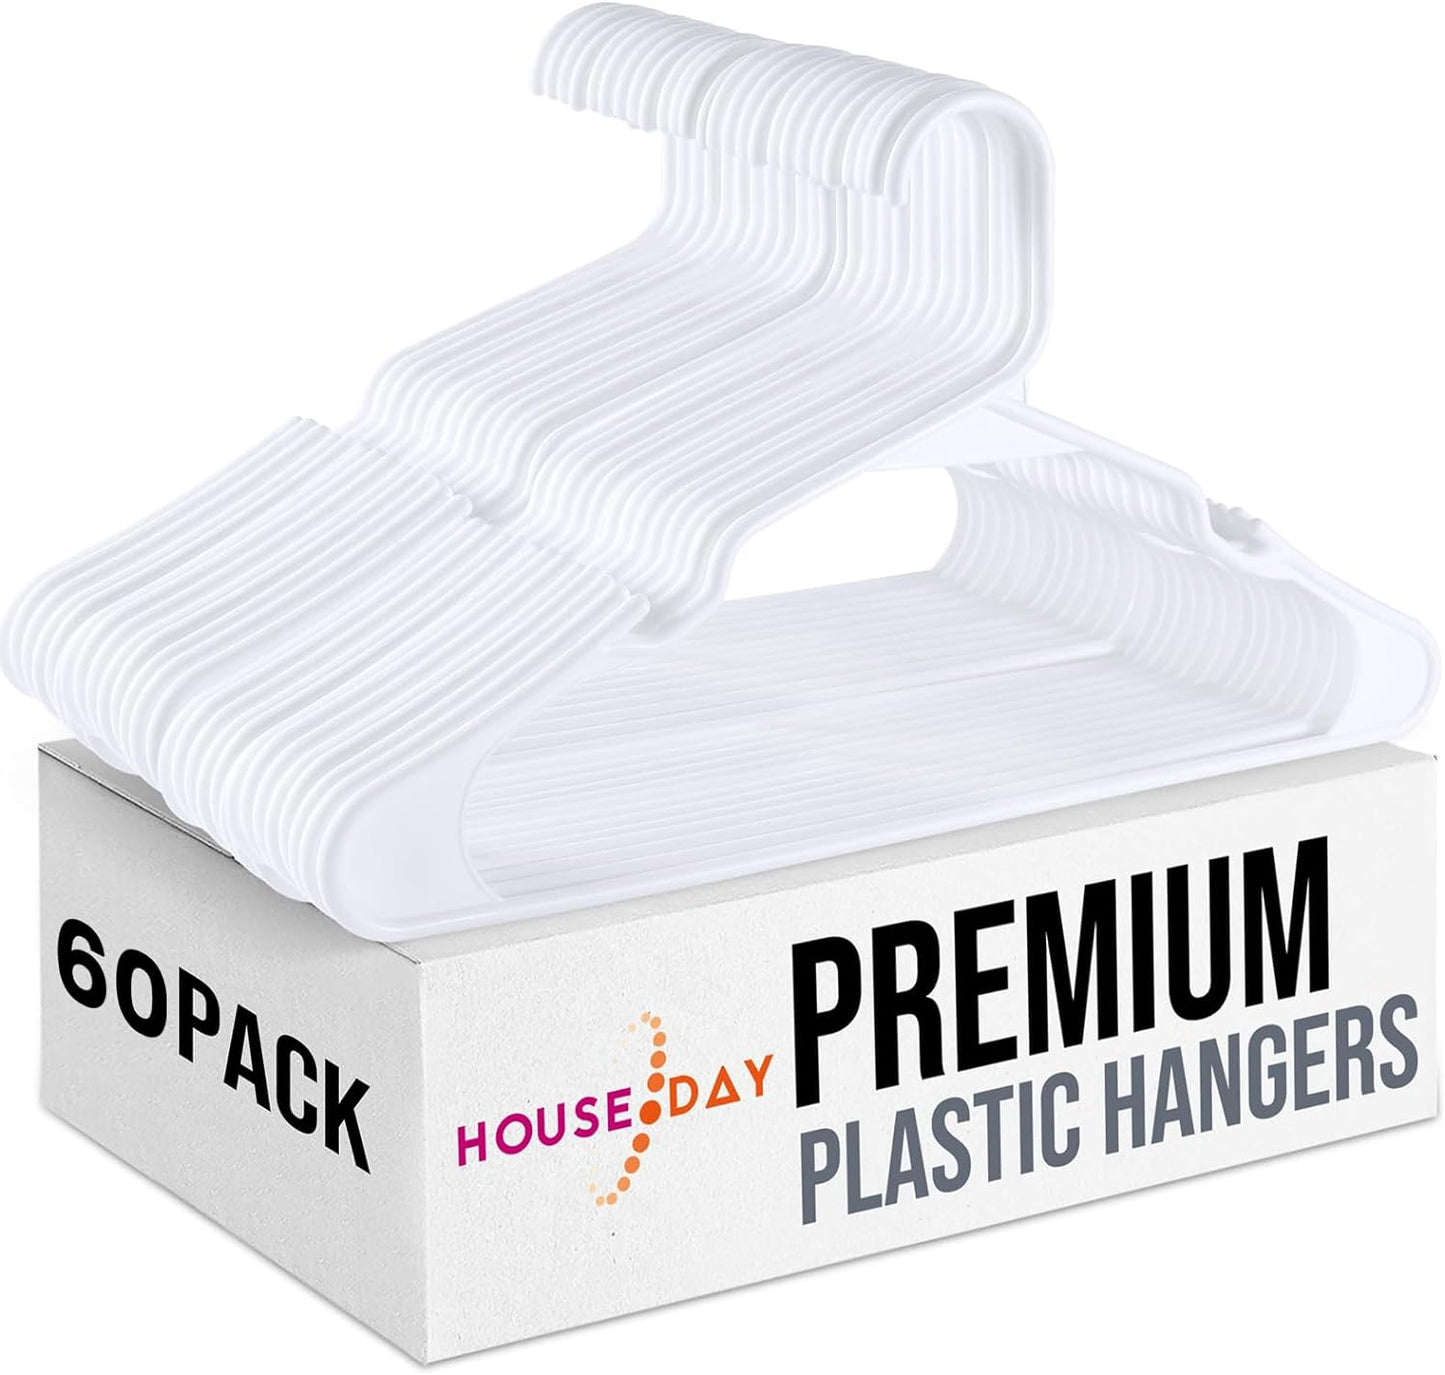 HOUSE DAY White Plastic Hangers 60 Pack